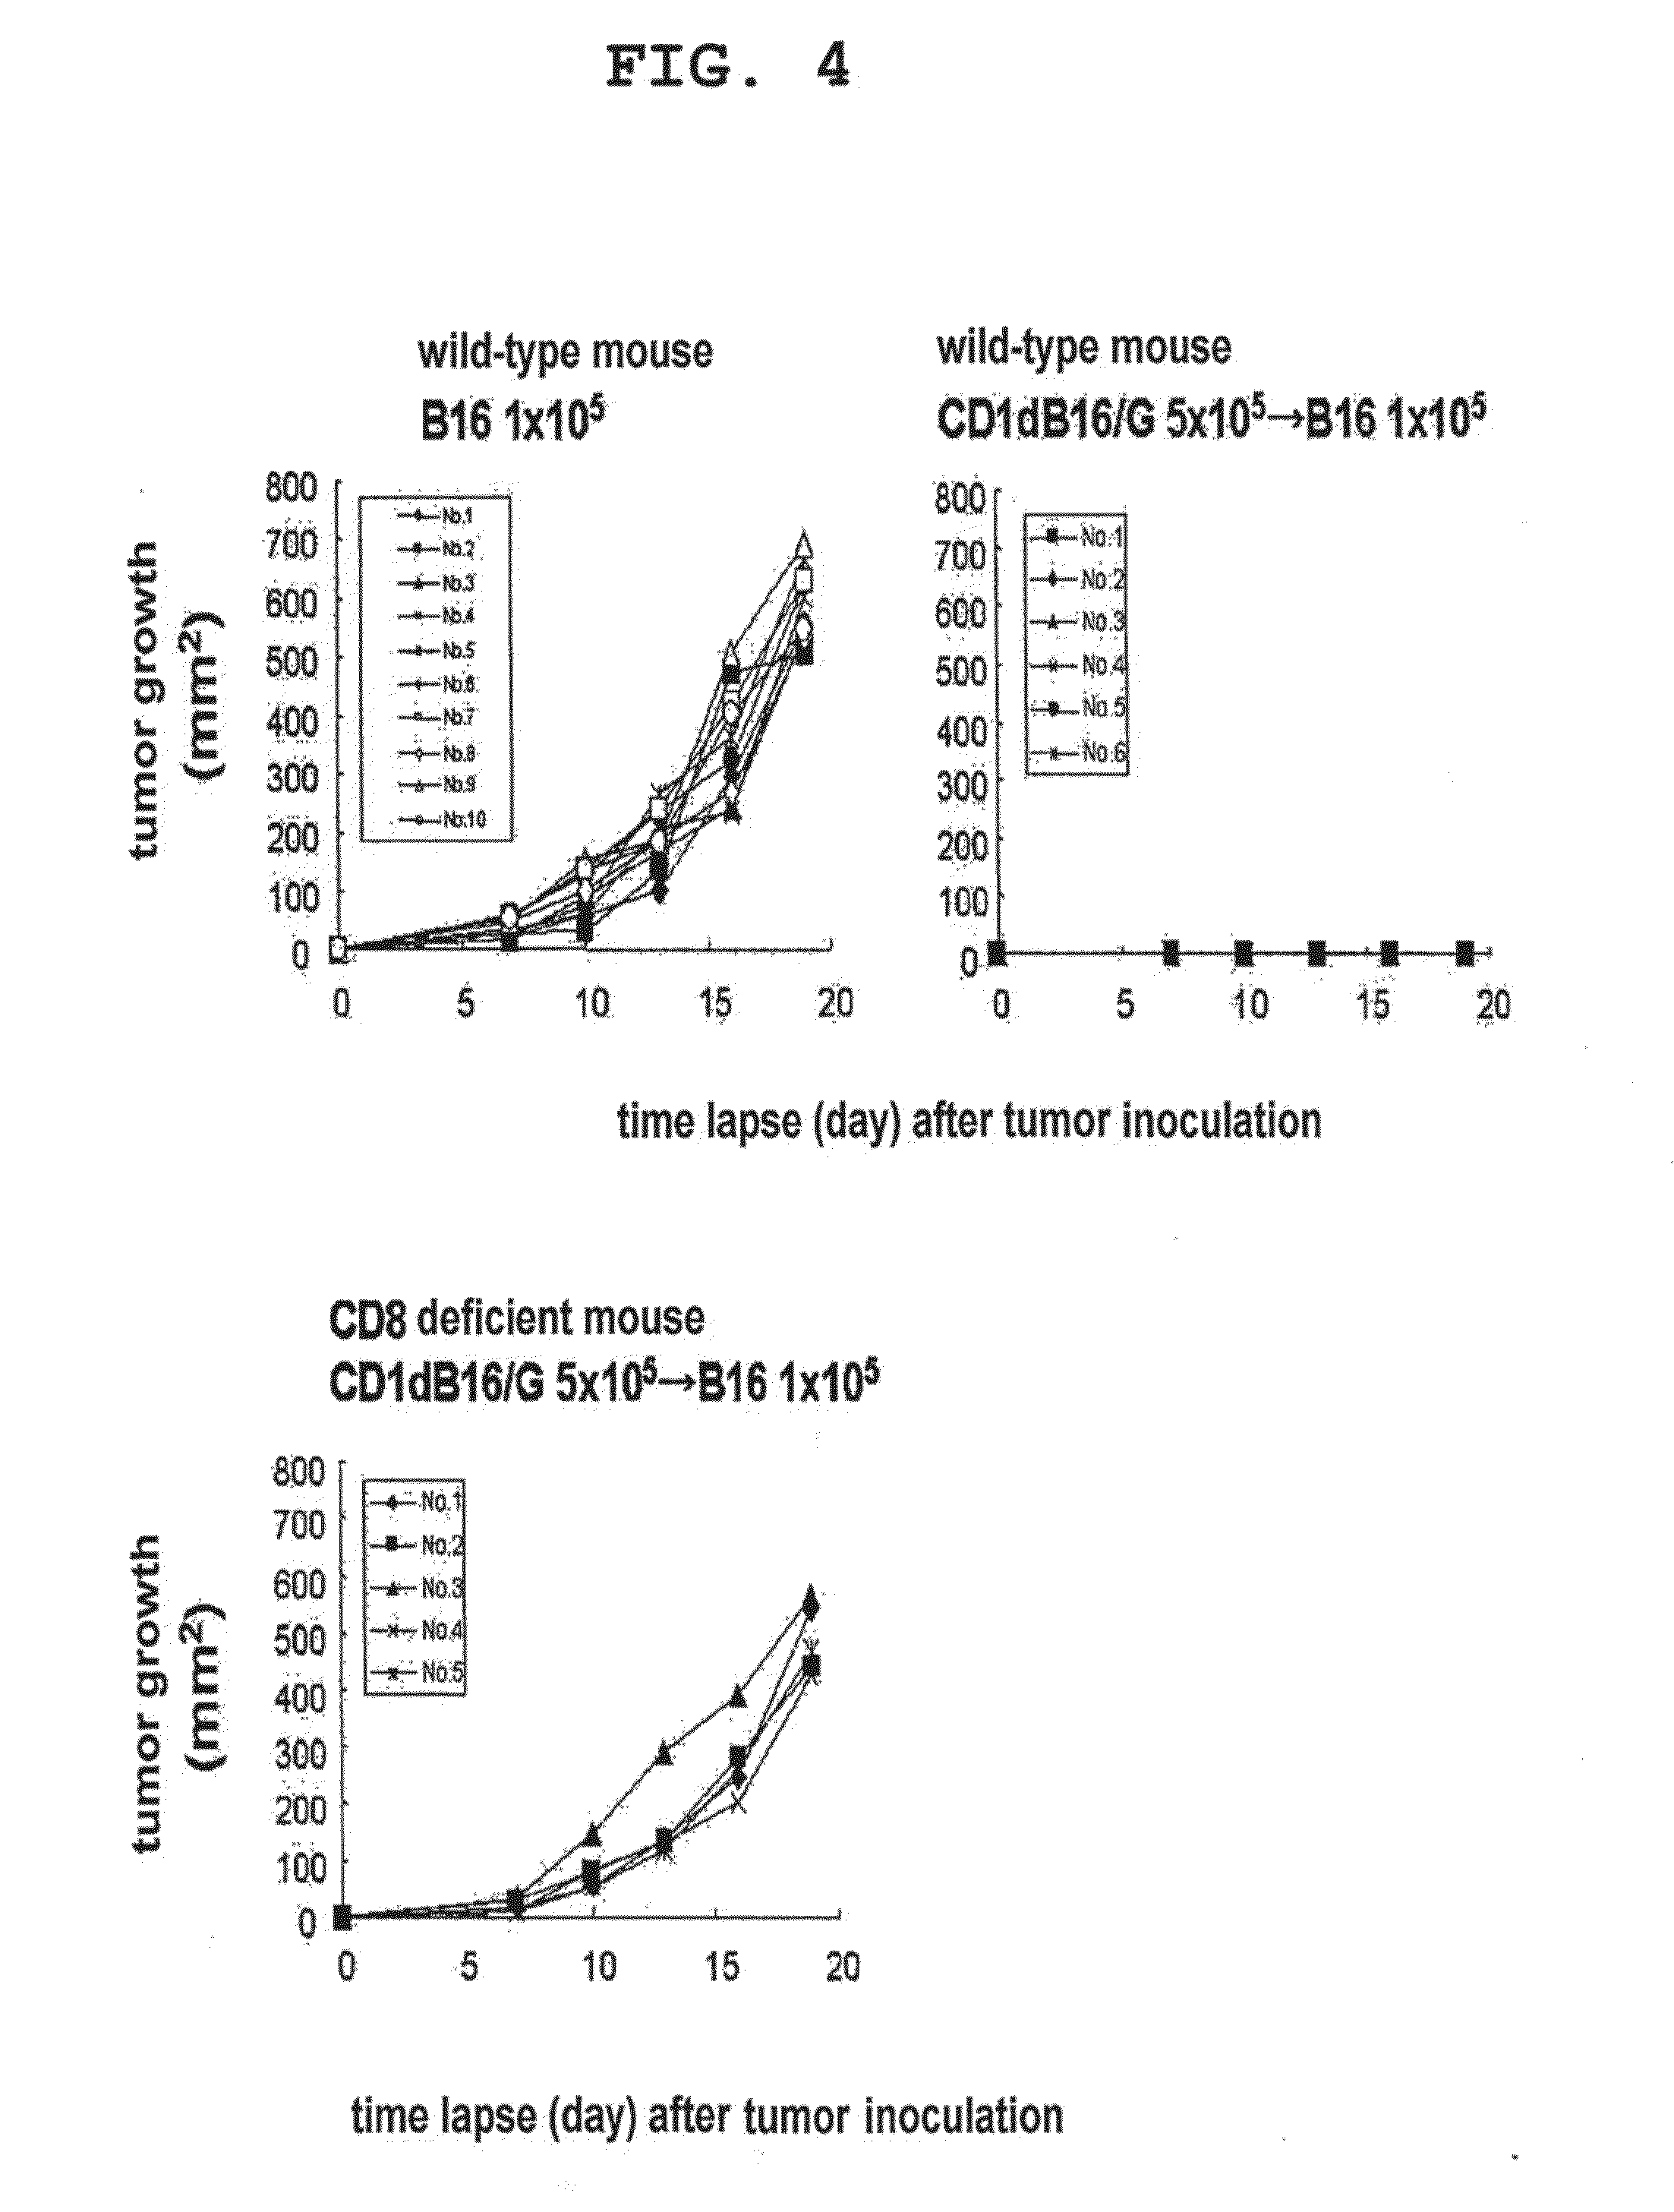 Immunotherapeutic method using artificial adjuvant vector cells that co-express cd1d and target antigen